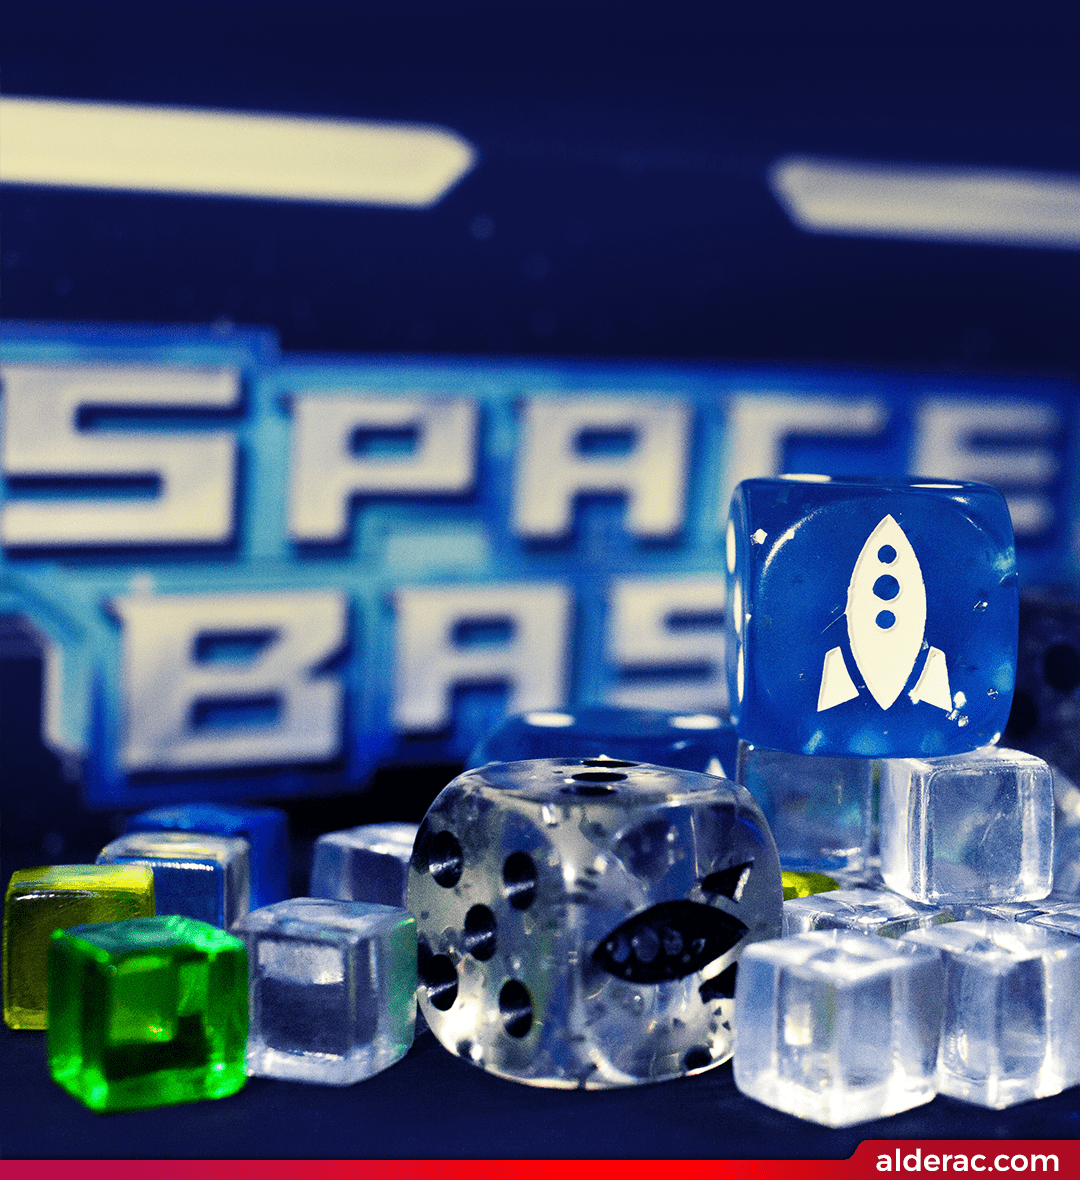 Space Base box and game components